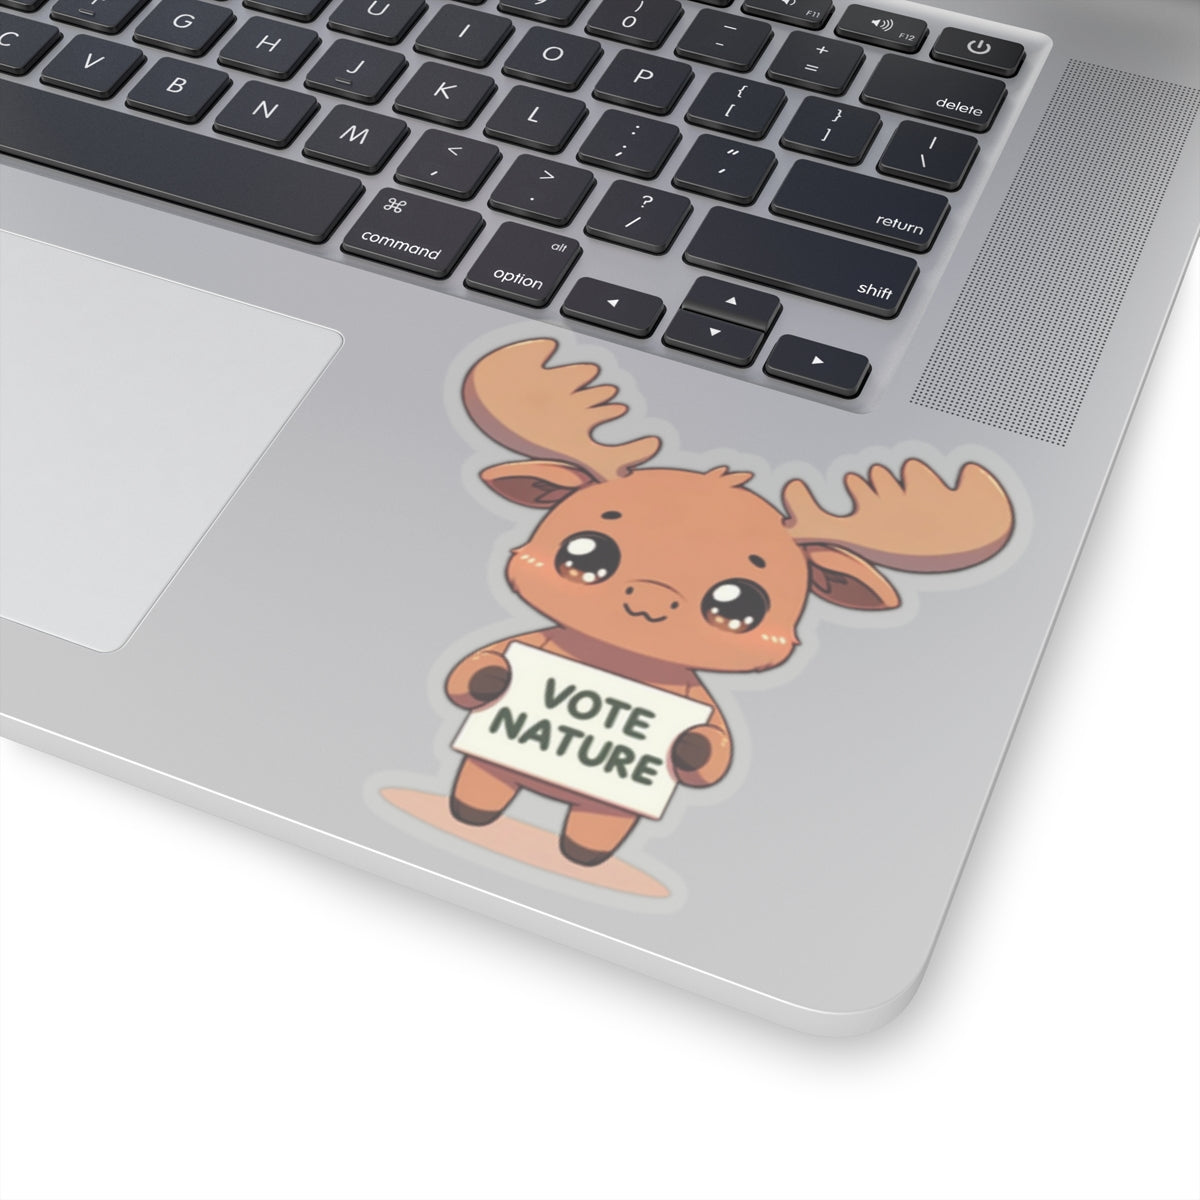 Inspirational Cute Moose Statement vinyl Sticker: Vote Nature! for laptop, kindle, phone, ipad, instrument case, notebook, or mood board